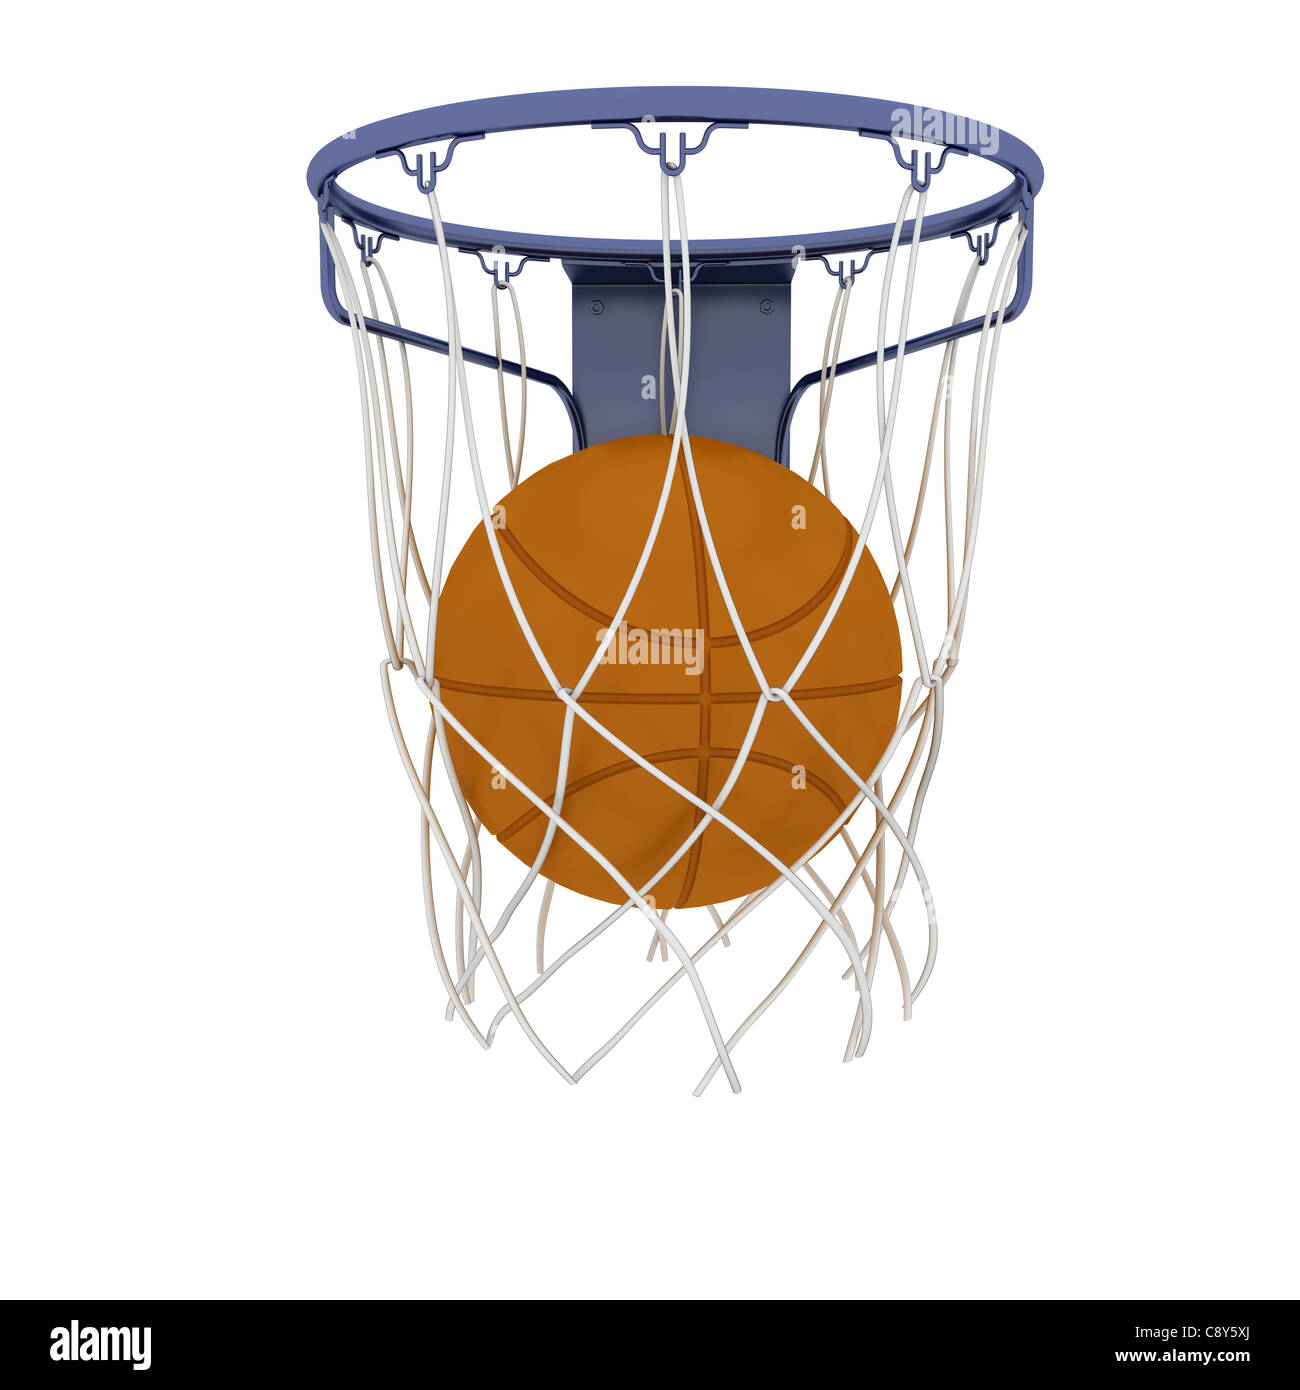 Two basketball items Stock Photo